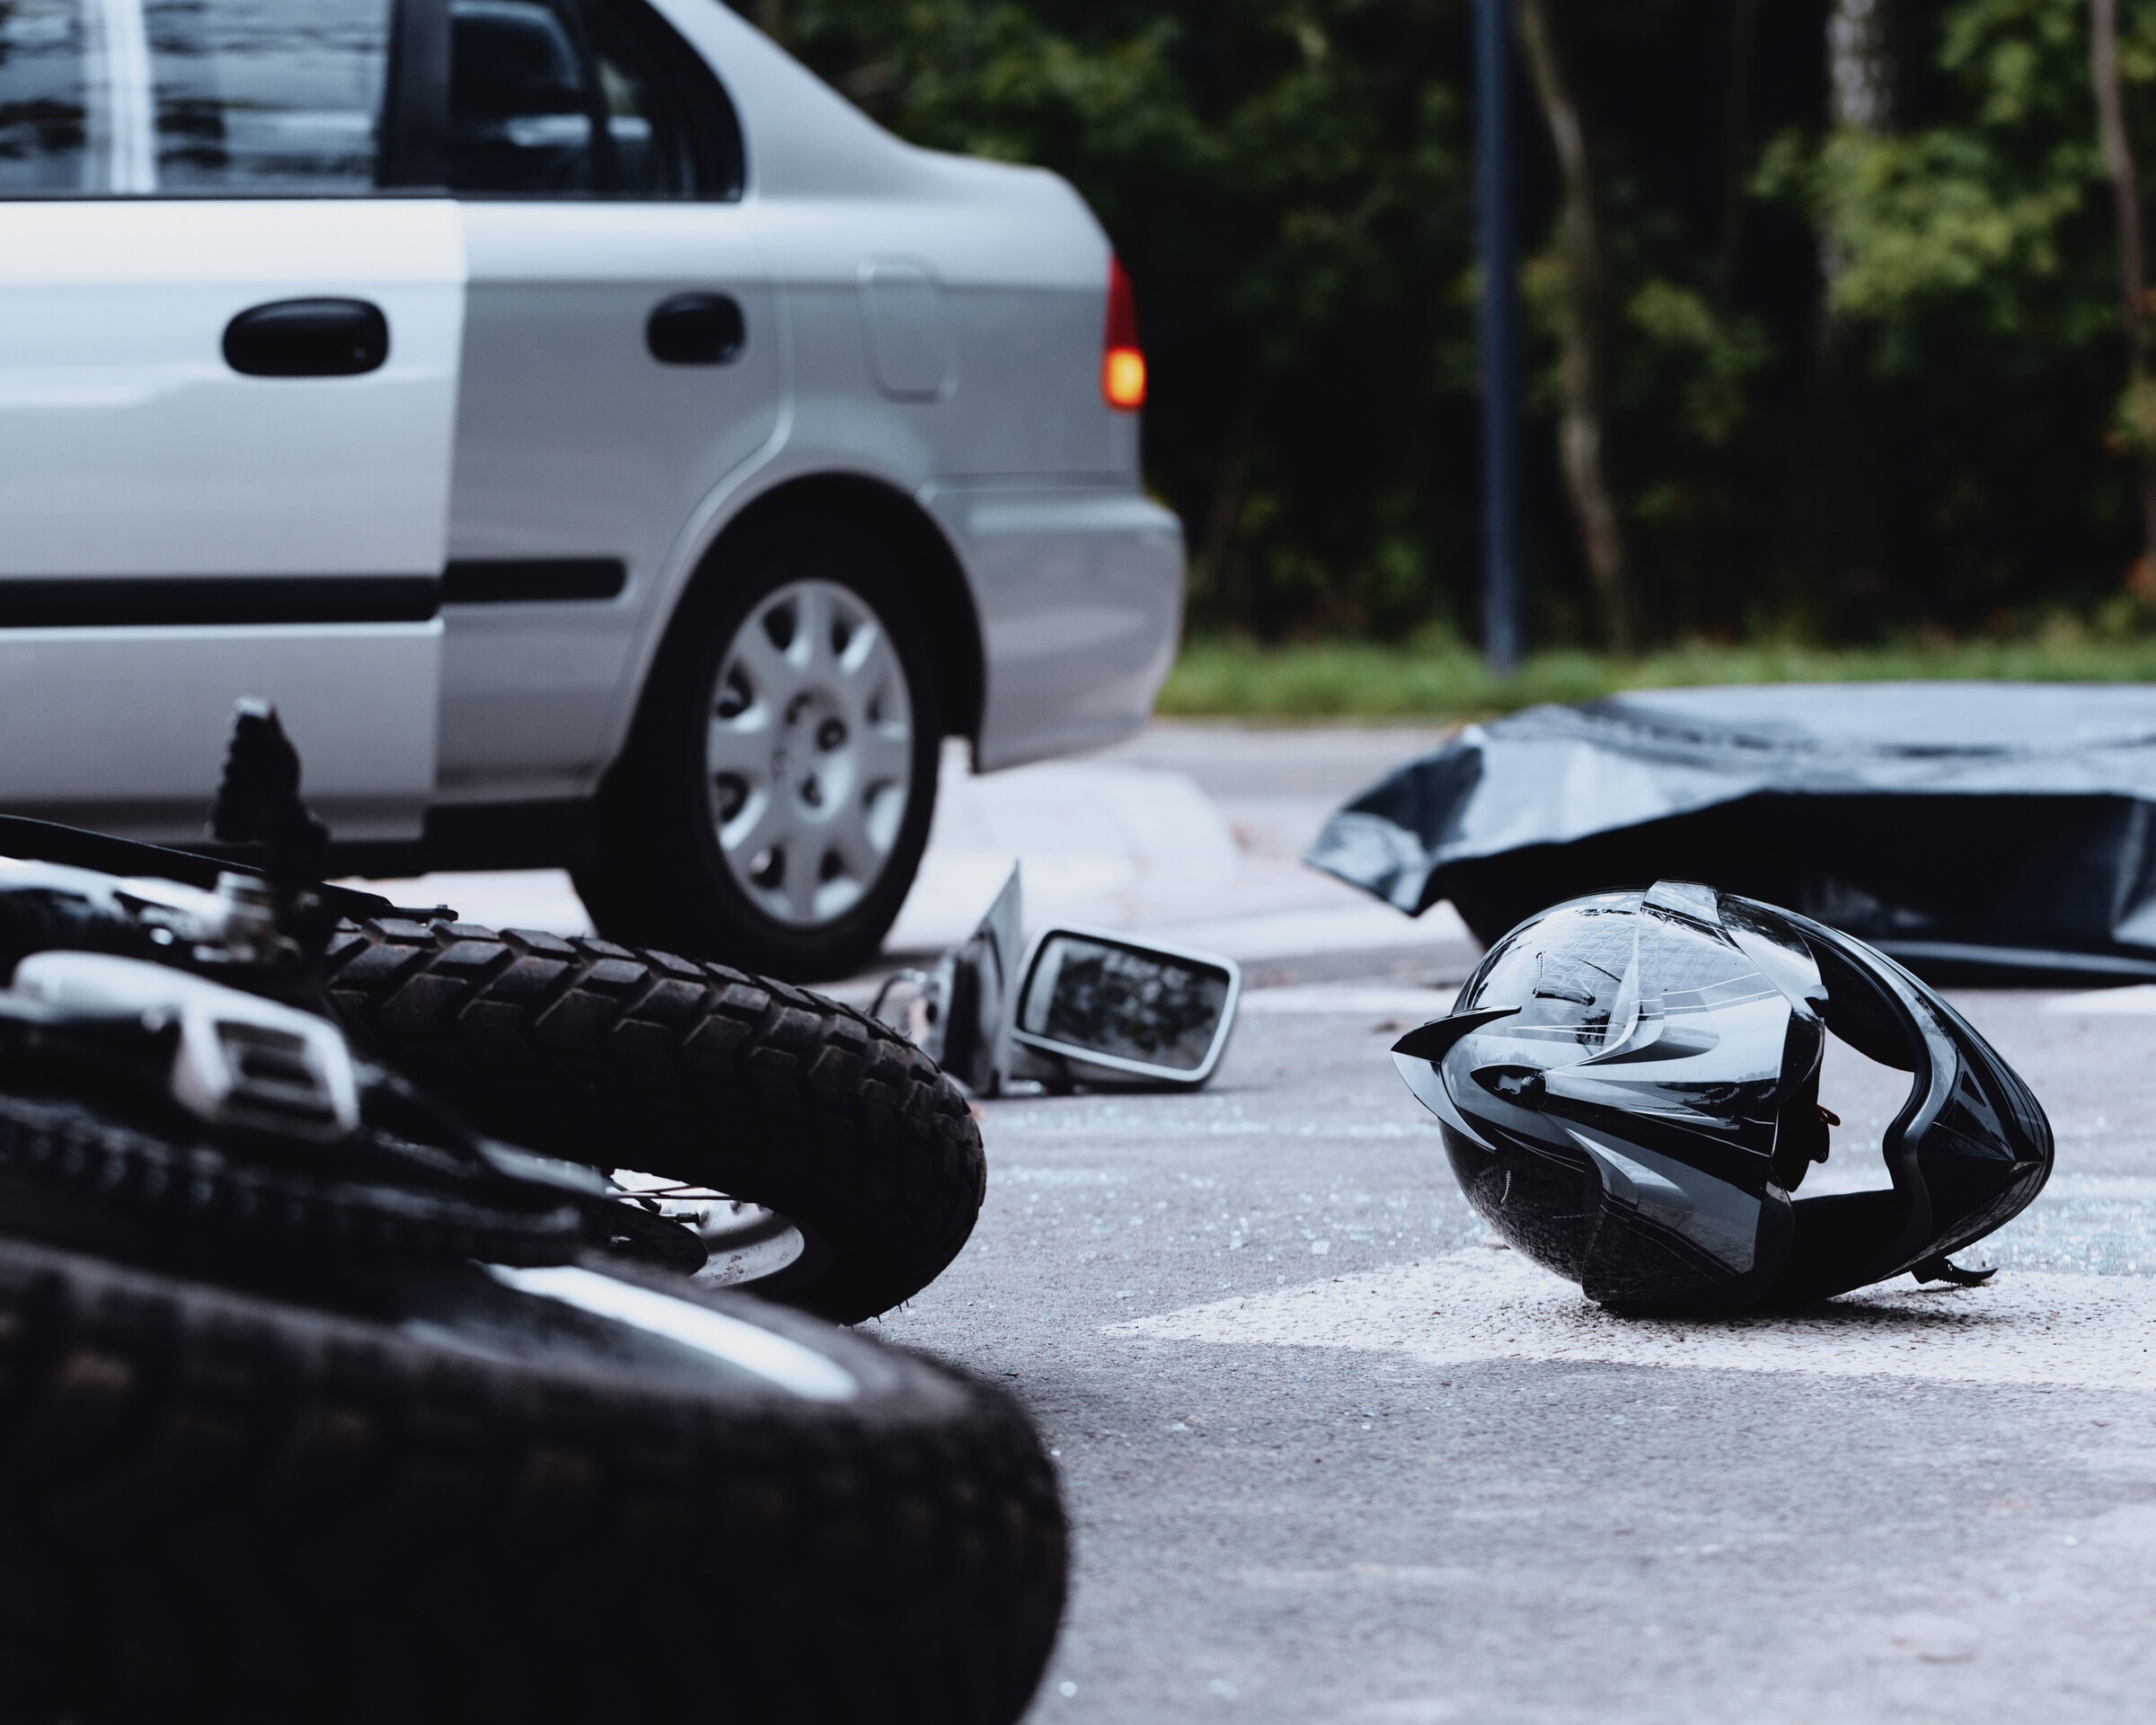 Reliable lawyers who are dedicated to providing support and guidance to those affected by car and motor vehicle accidents in Greenville